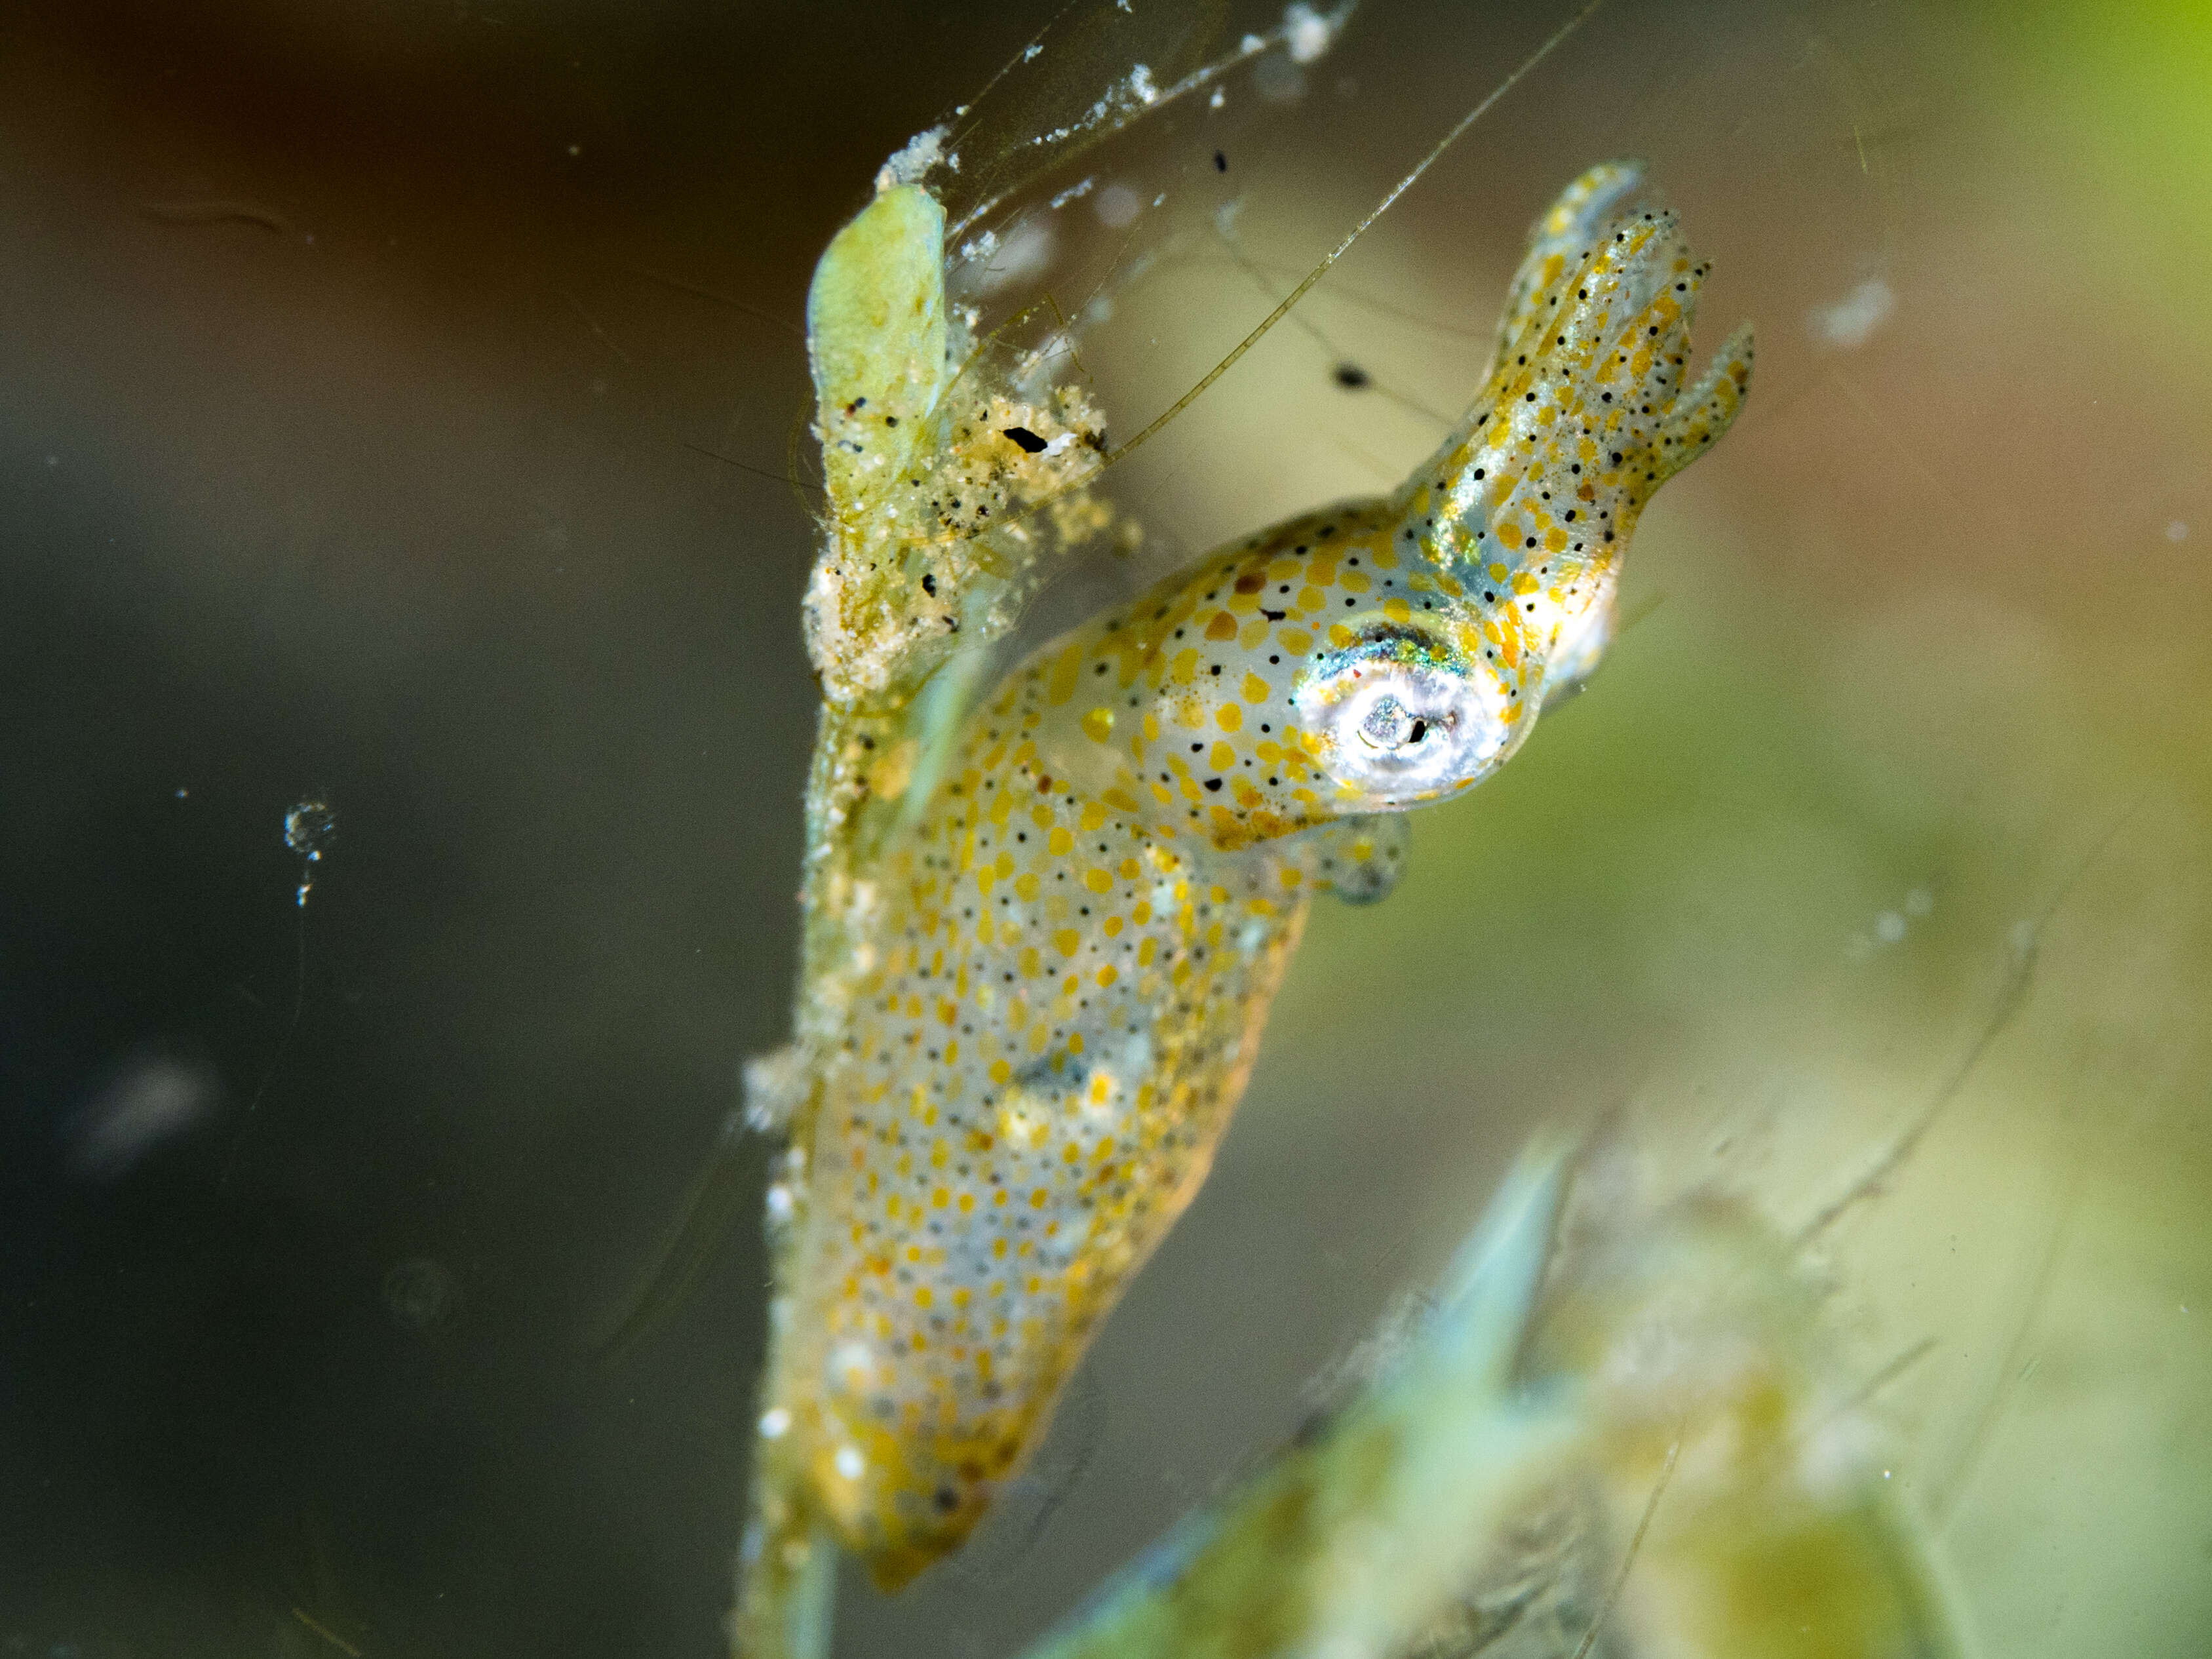 Image of Two-toned Pygmy Squid